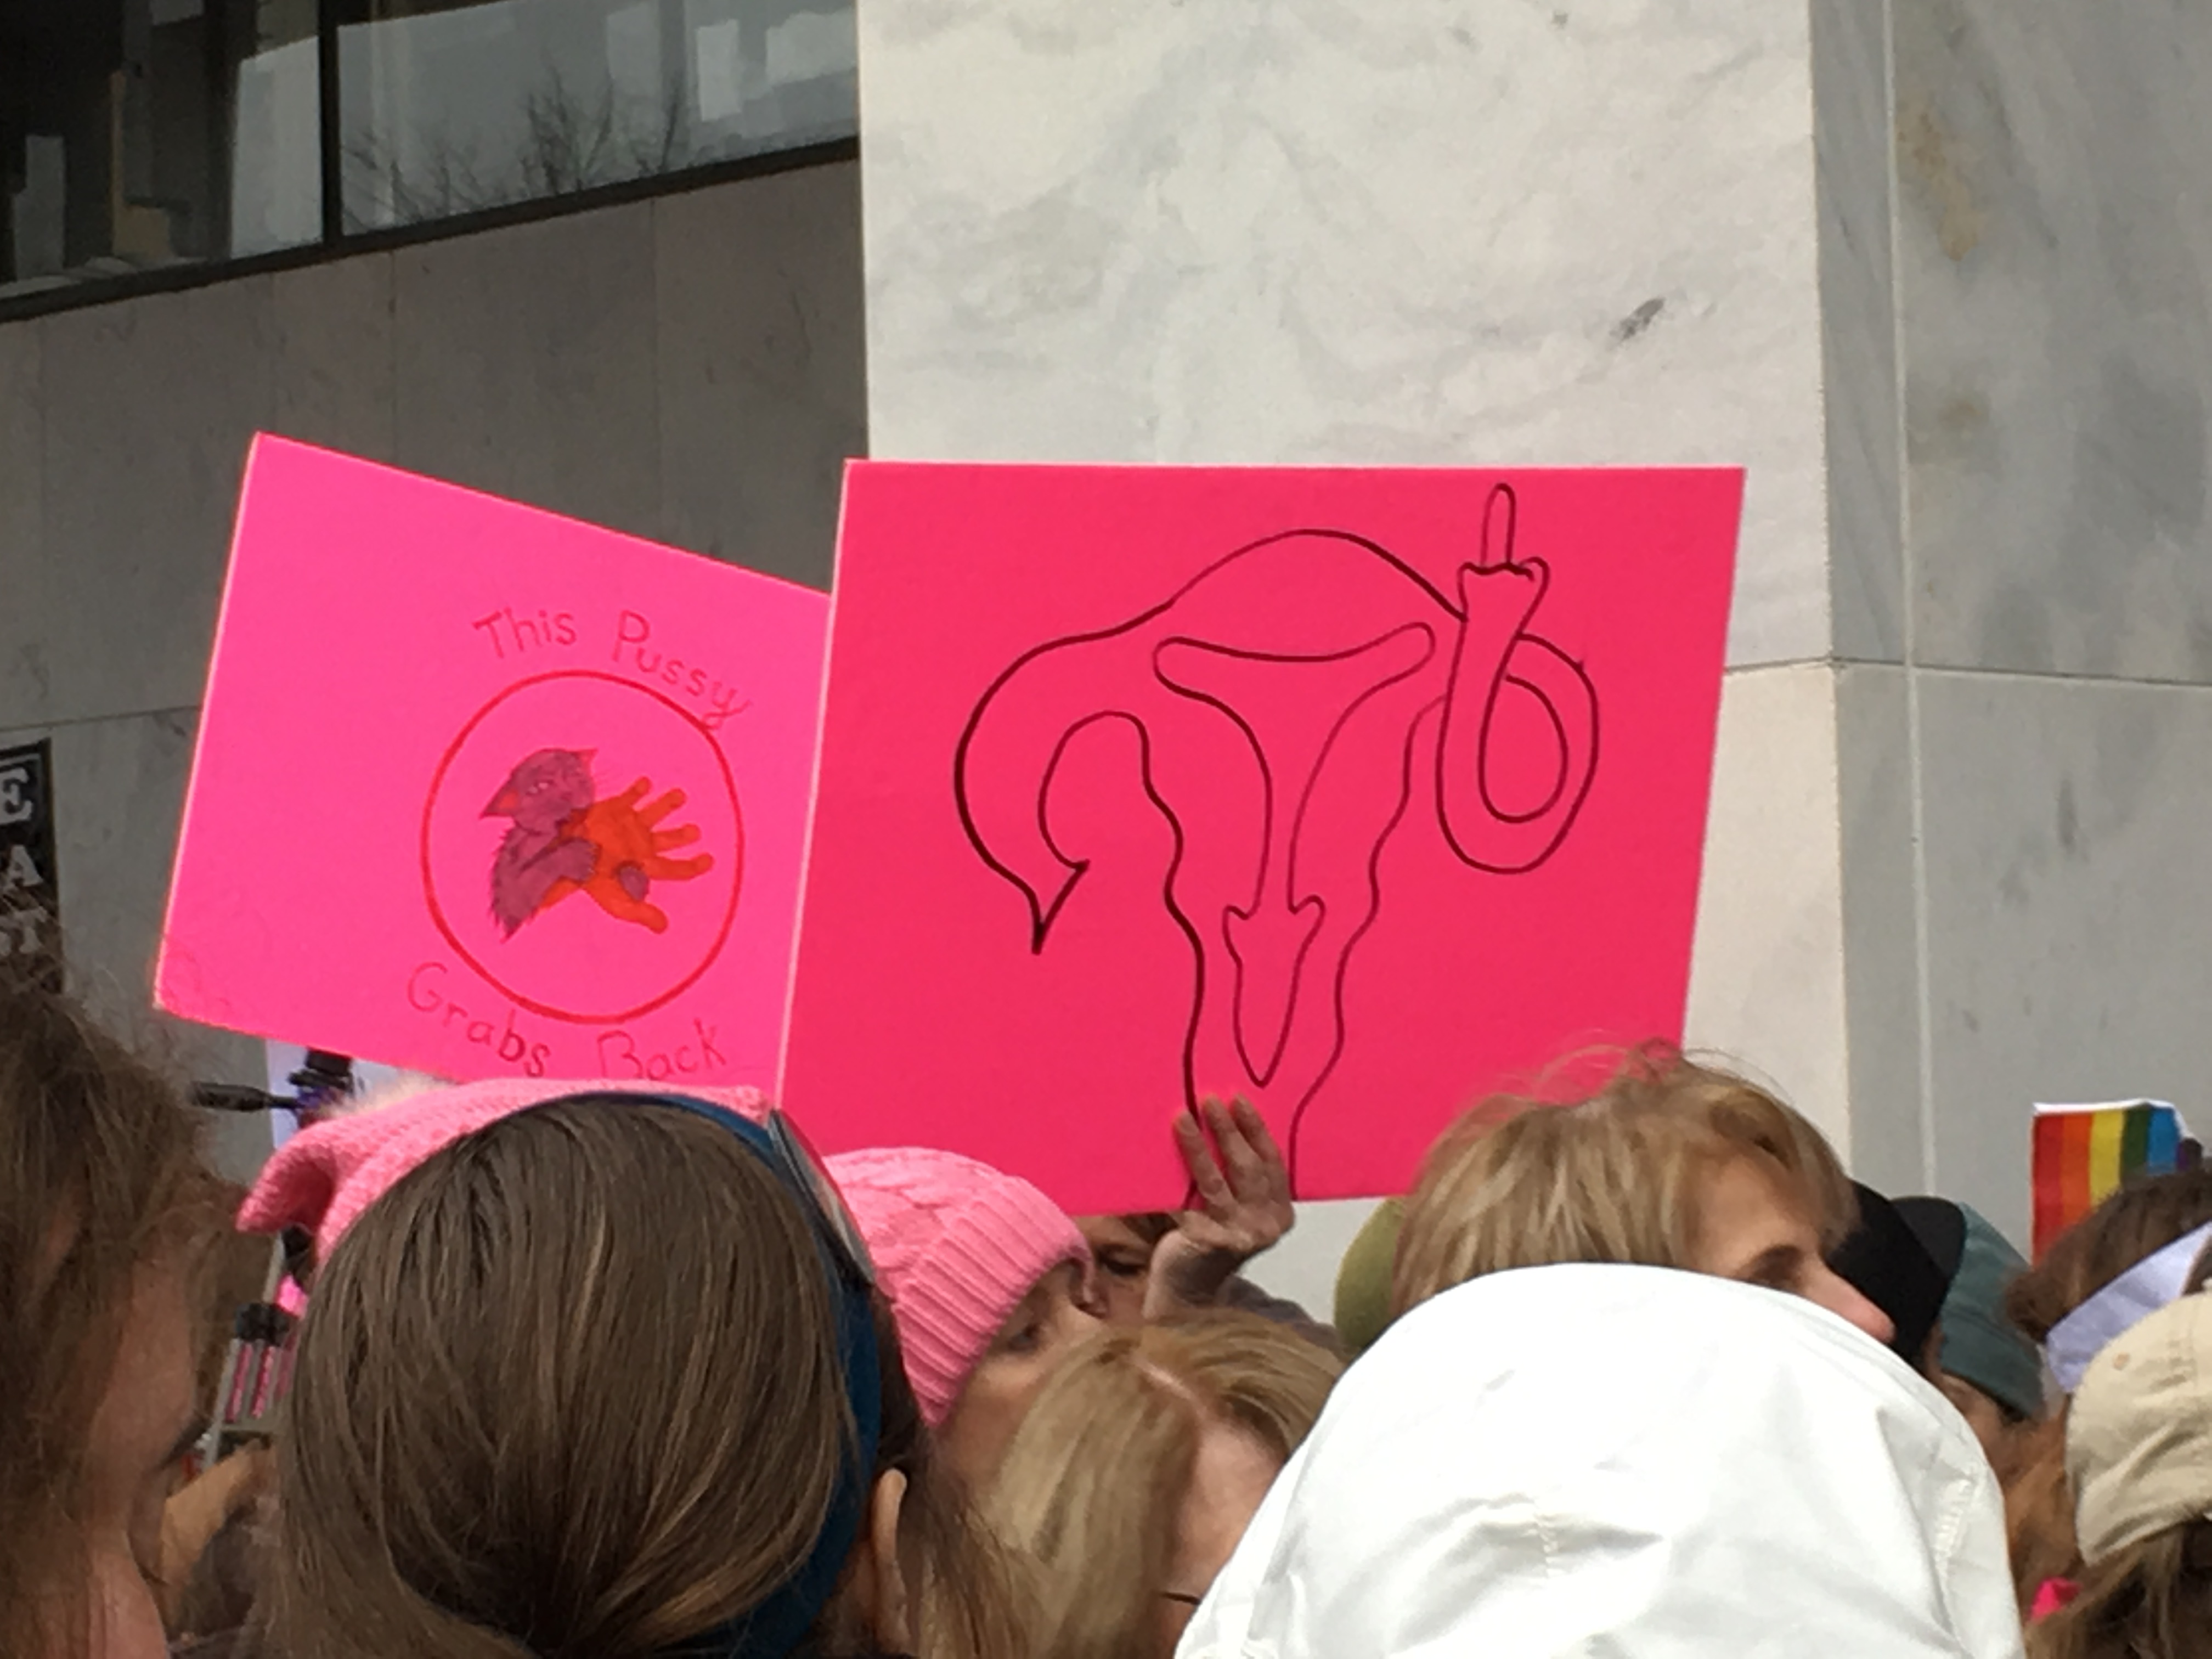  A sign with a uterus that looks like it is holding up a middle finger